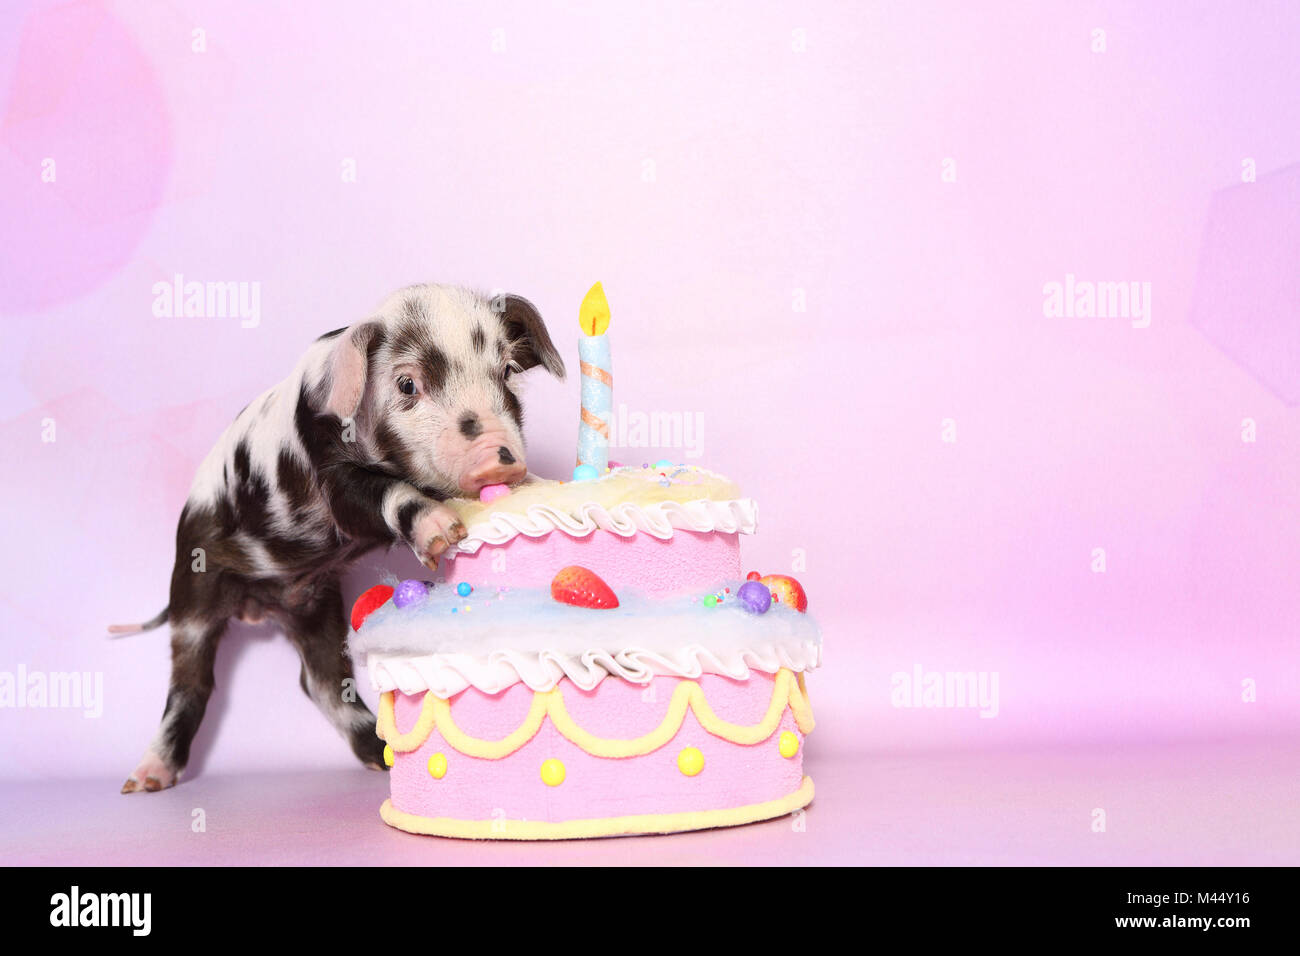 Domestic Pig, Turopolje x ?. Piglet (4 weeks old) eating from a big birthday cake. Studio picture seen against a pink background. Germany Stock Photo